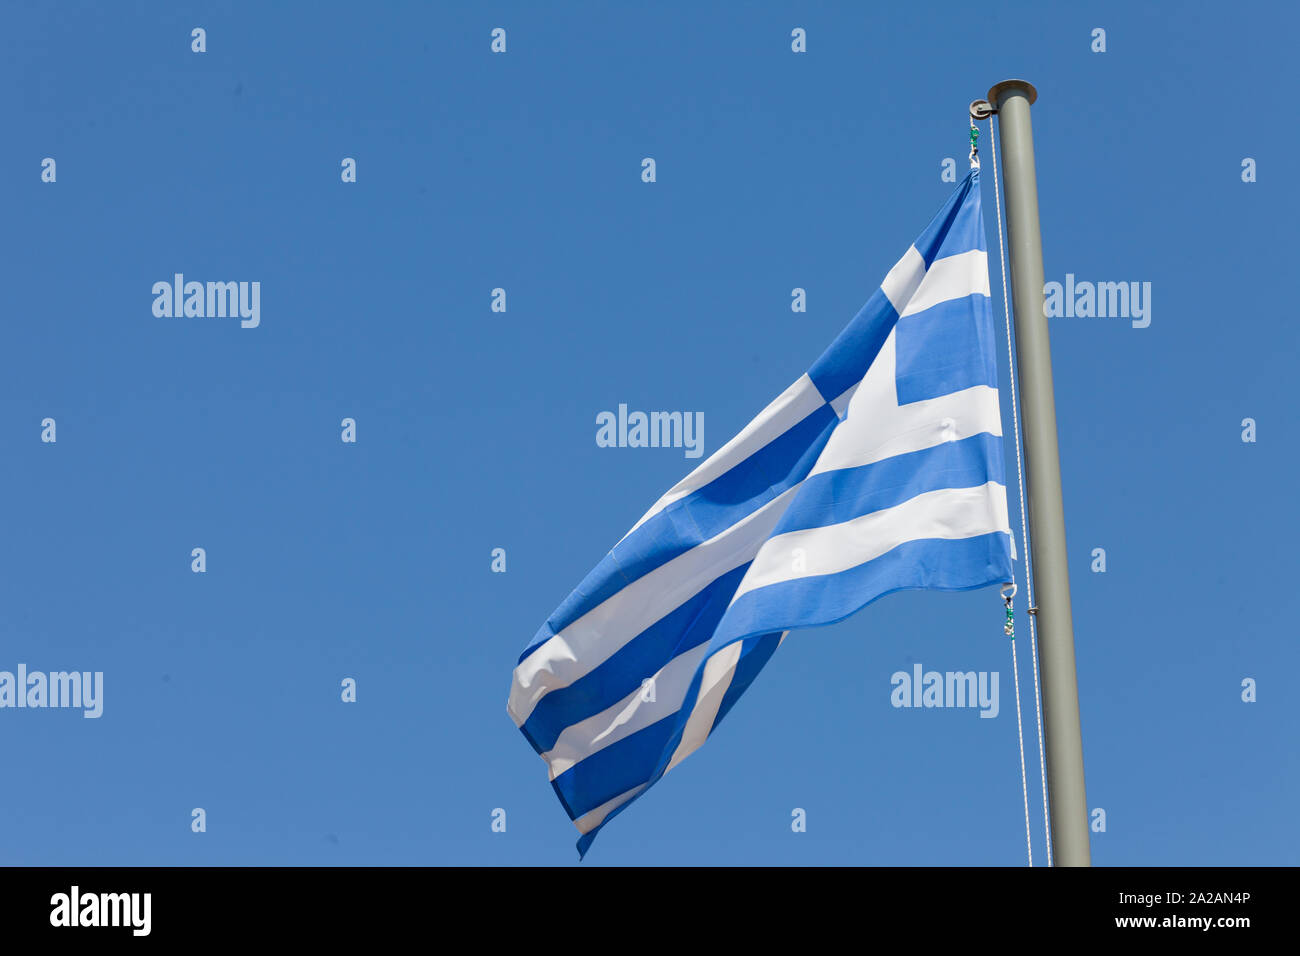 The greek flag, fiies high in a clear blue sky. Stock Photo